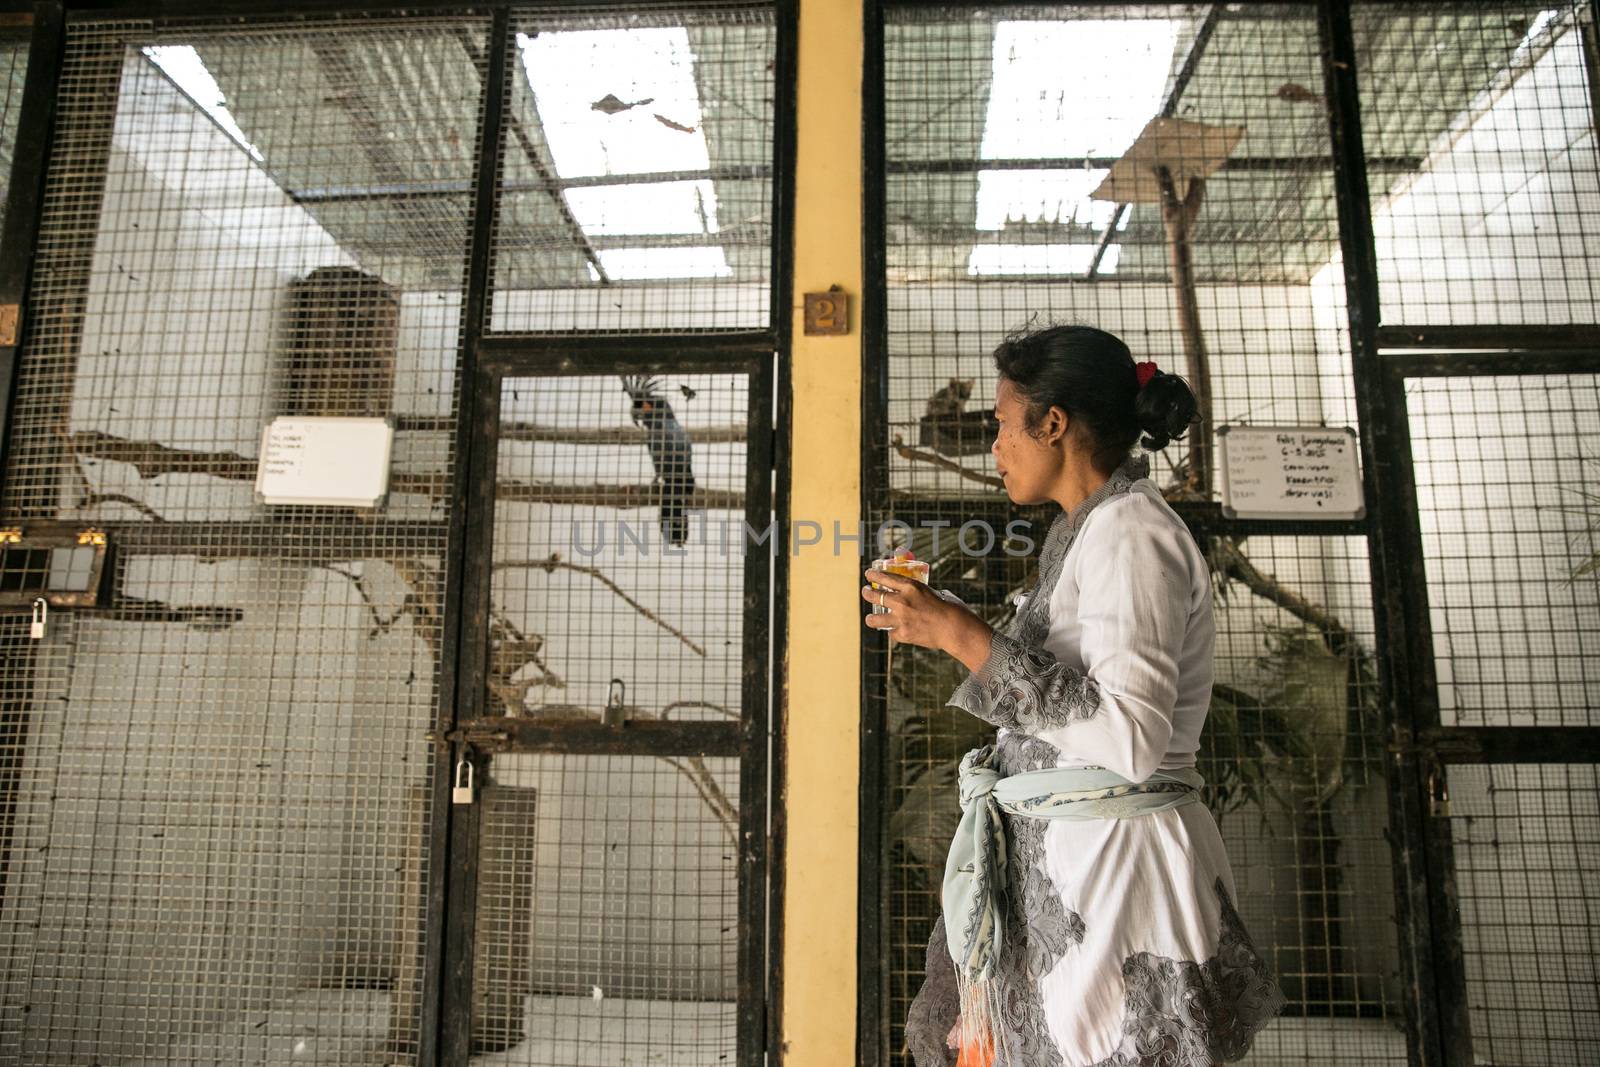 INDONESIA, Bali: A Bali Zoo employee checks up on the animals leading up to the festival of Tumpek Kandeng in Bali, Indonesia on October 3, 2015. The festival honors the animals as Hindus worship Sang Hyang Rare Angon, the god of cattle and livestock.